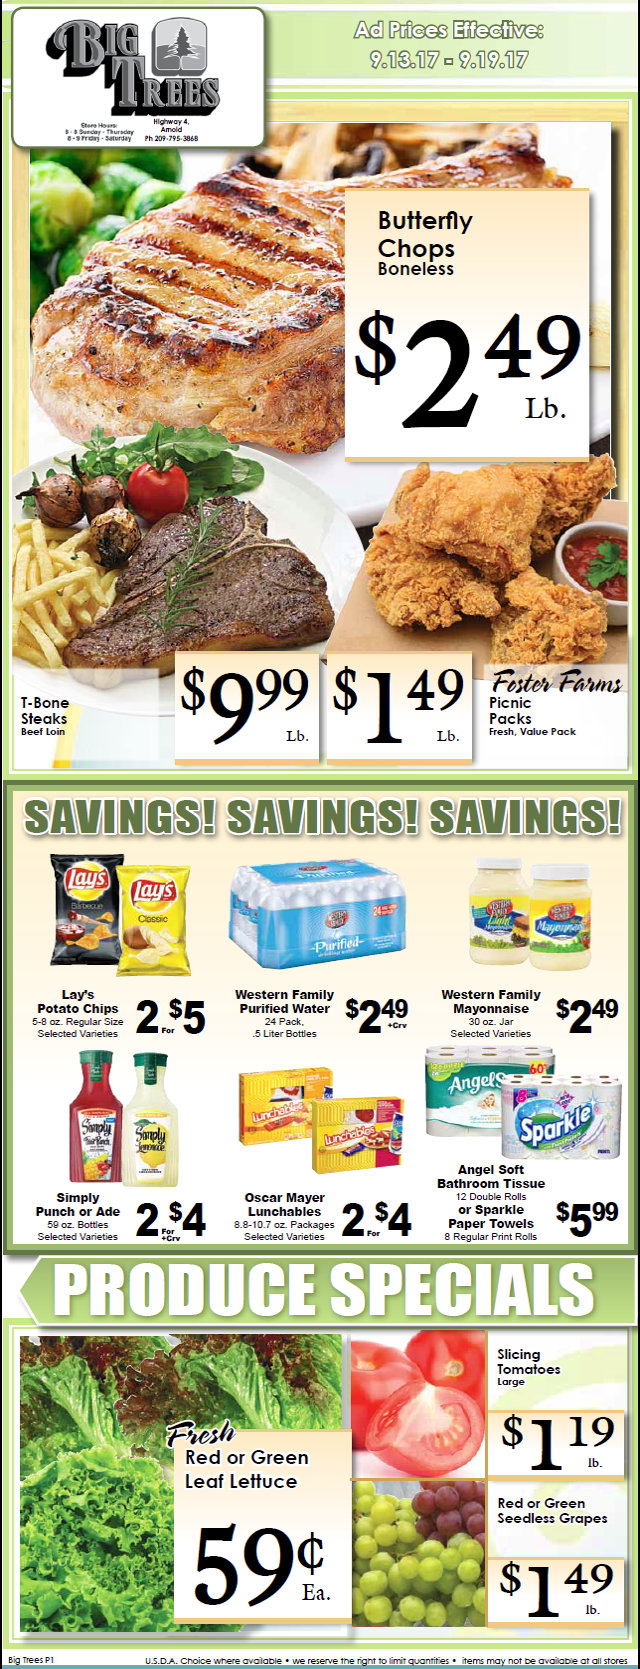 Big Trees Market Weekly Ad & Specials Through September 19th